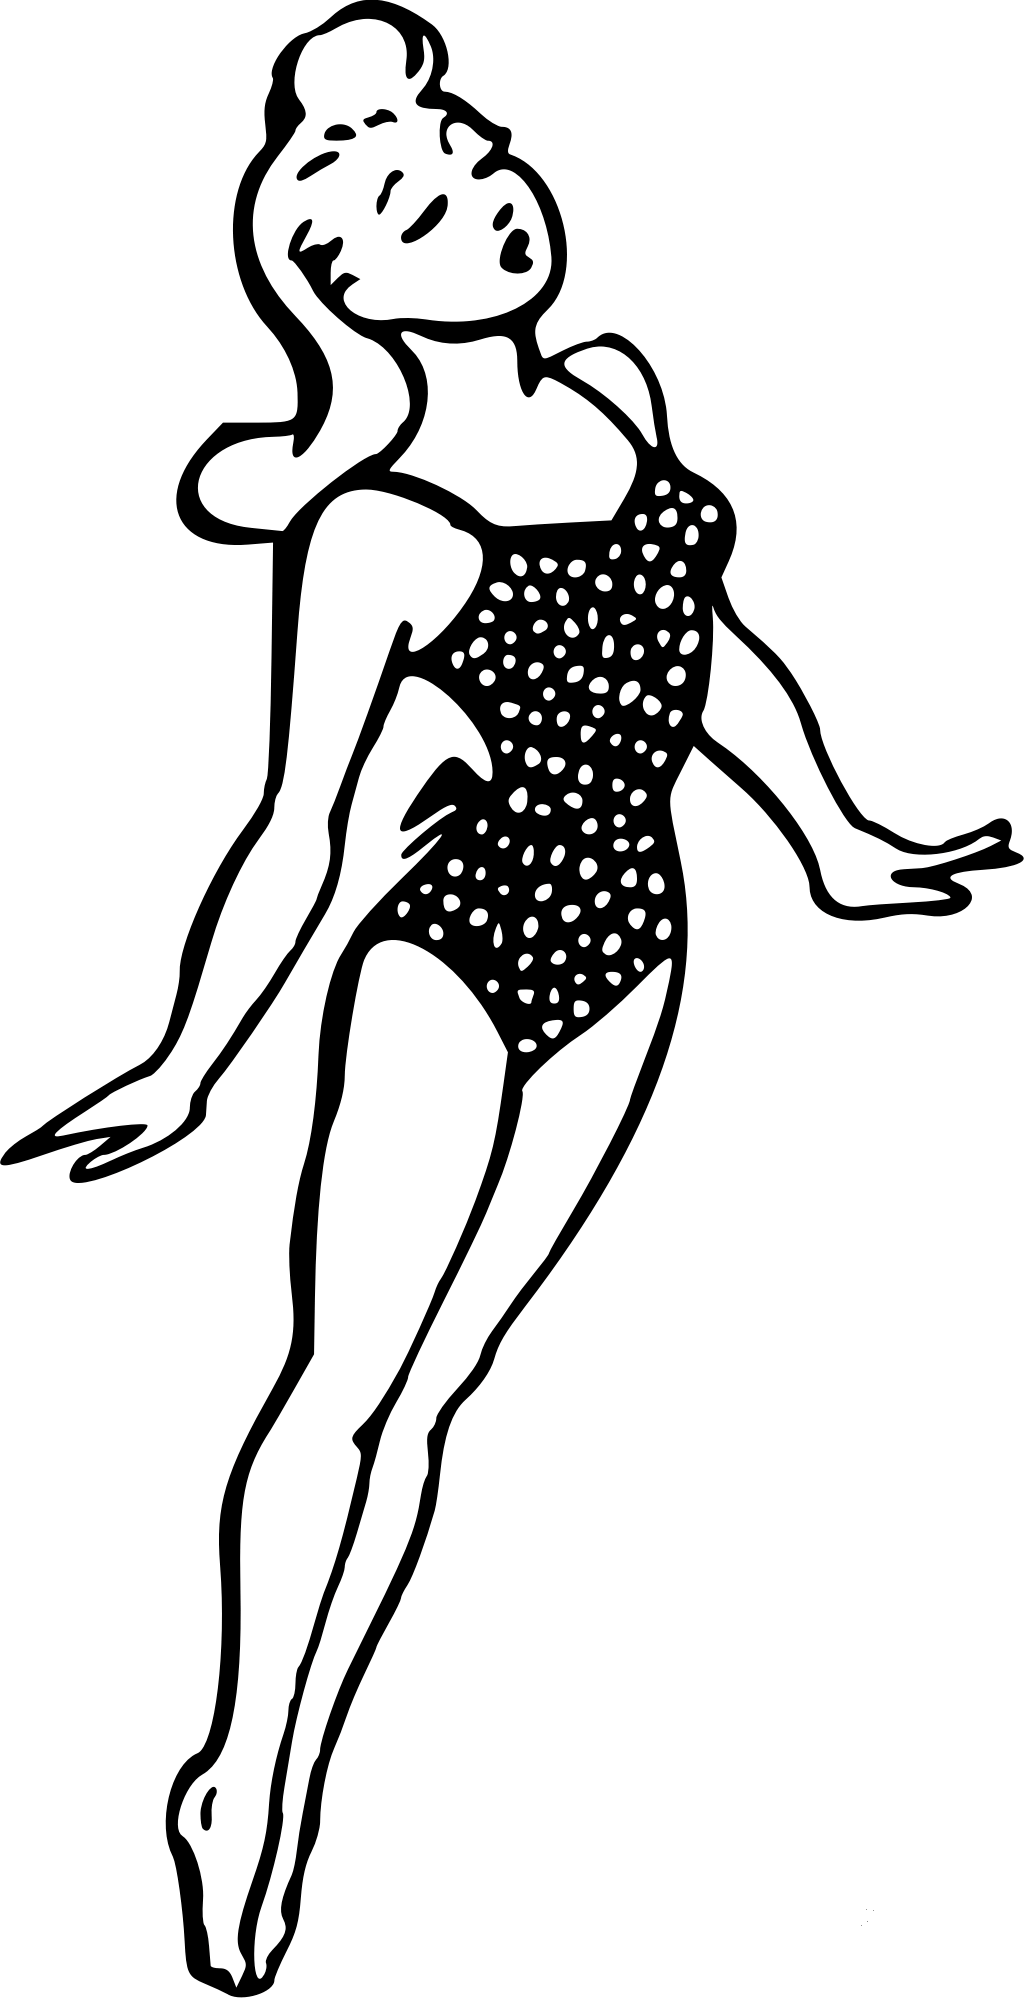 Vintage Lady In Swimsuit Coloring Page Colouringpages The Best Porn